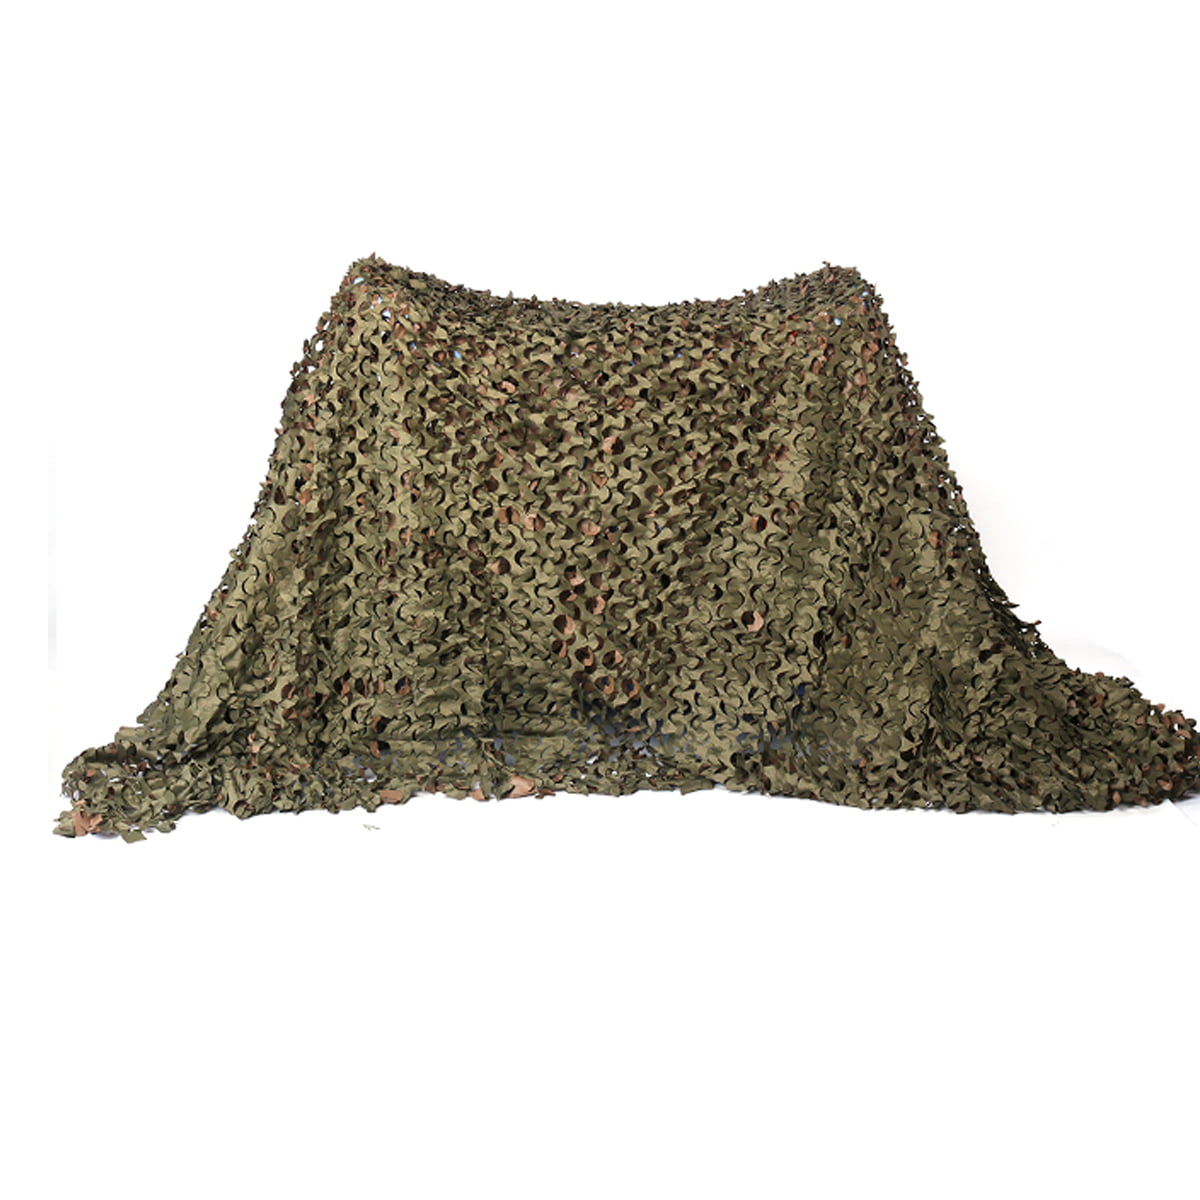 Details about   Camo Netting Blinds Great for Sunshade Camping Shooting Hunting Decoration 